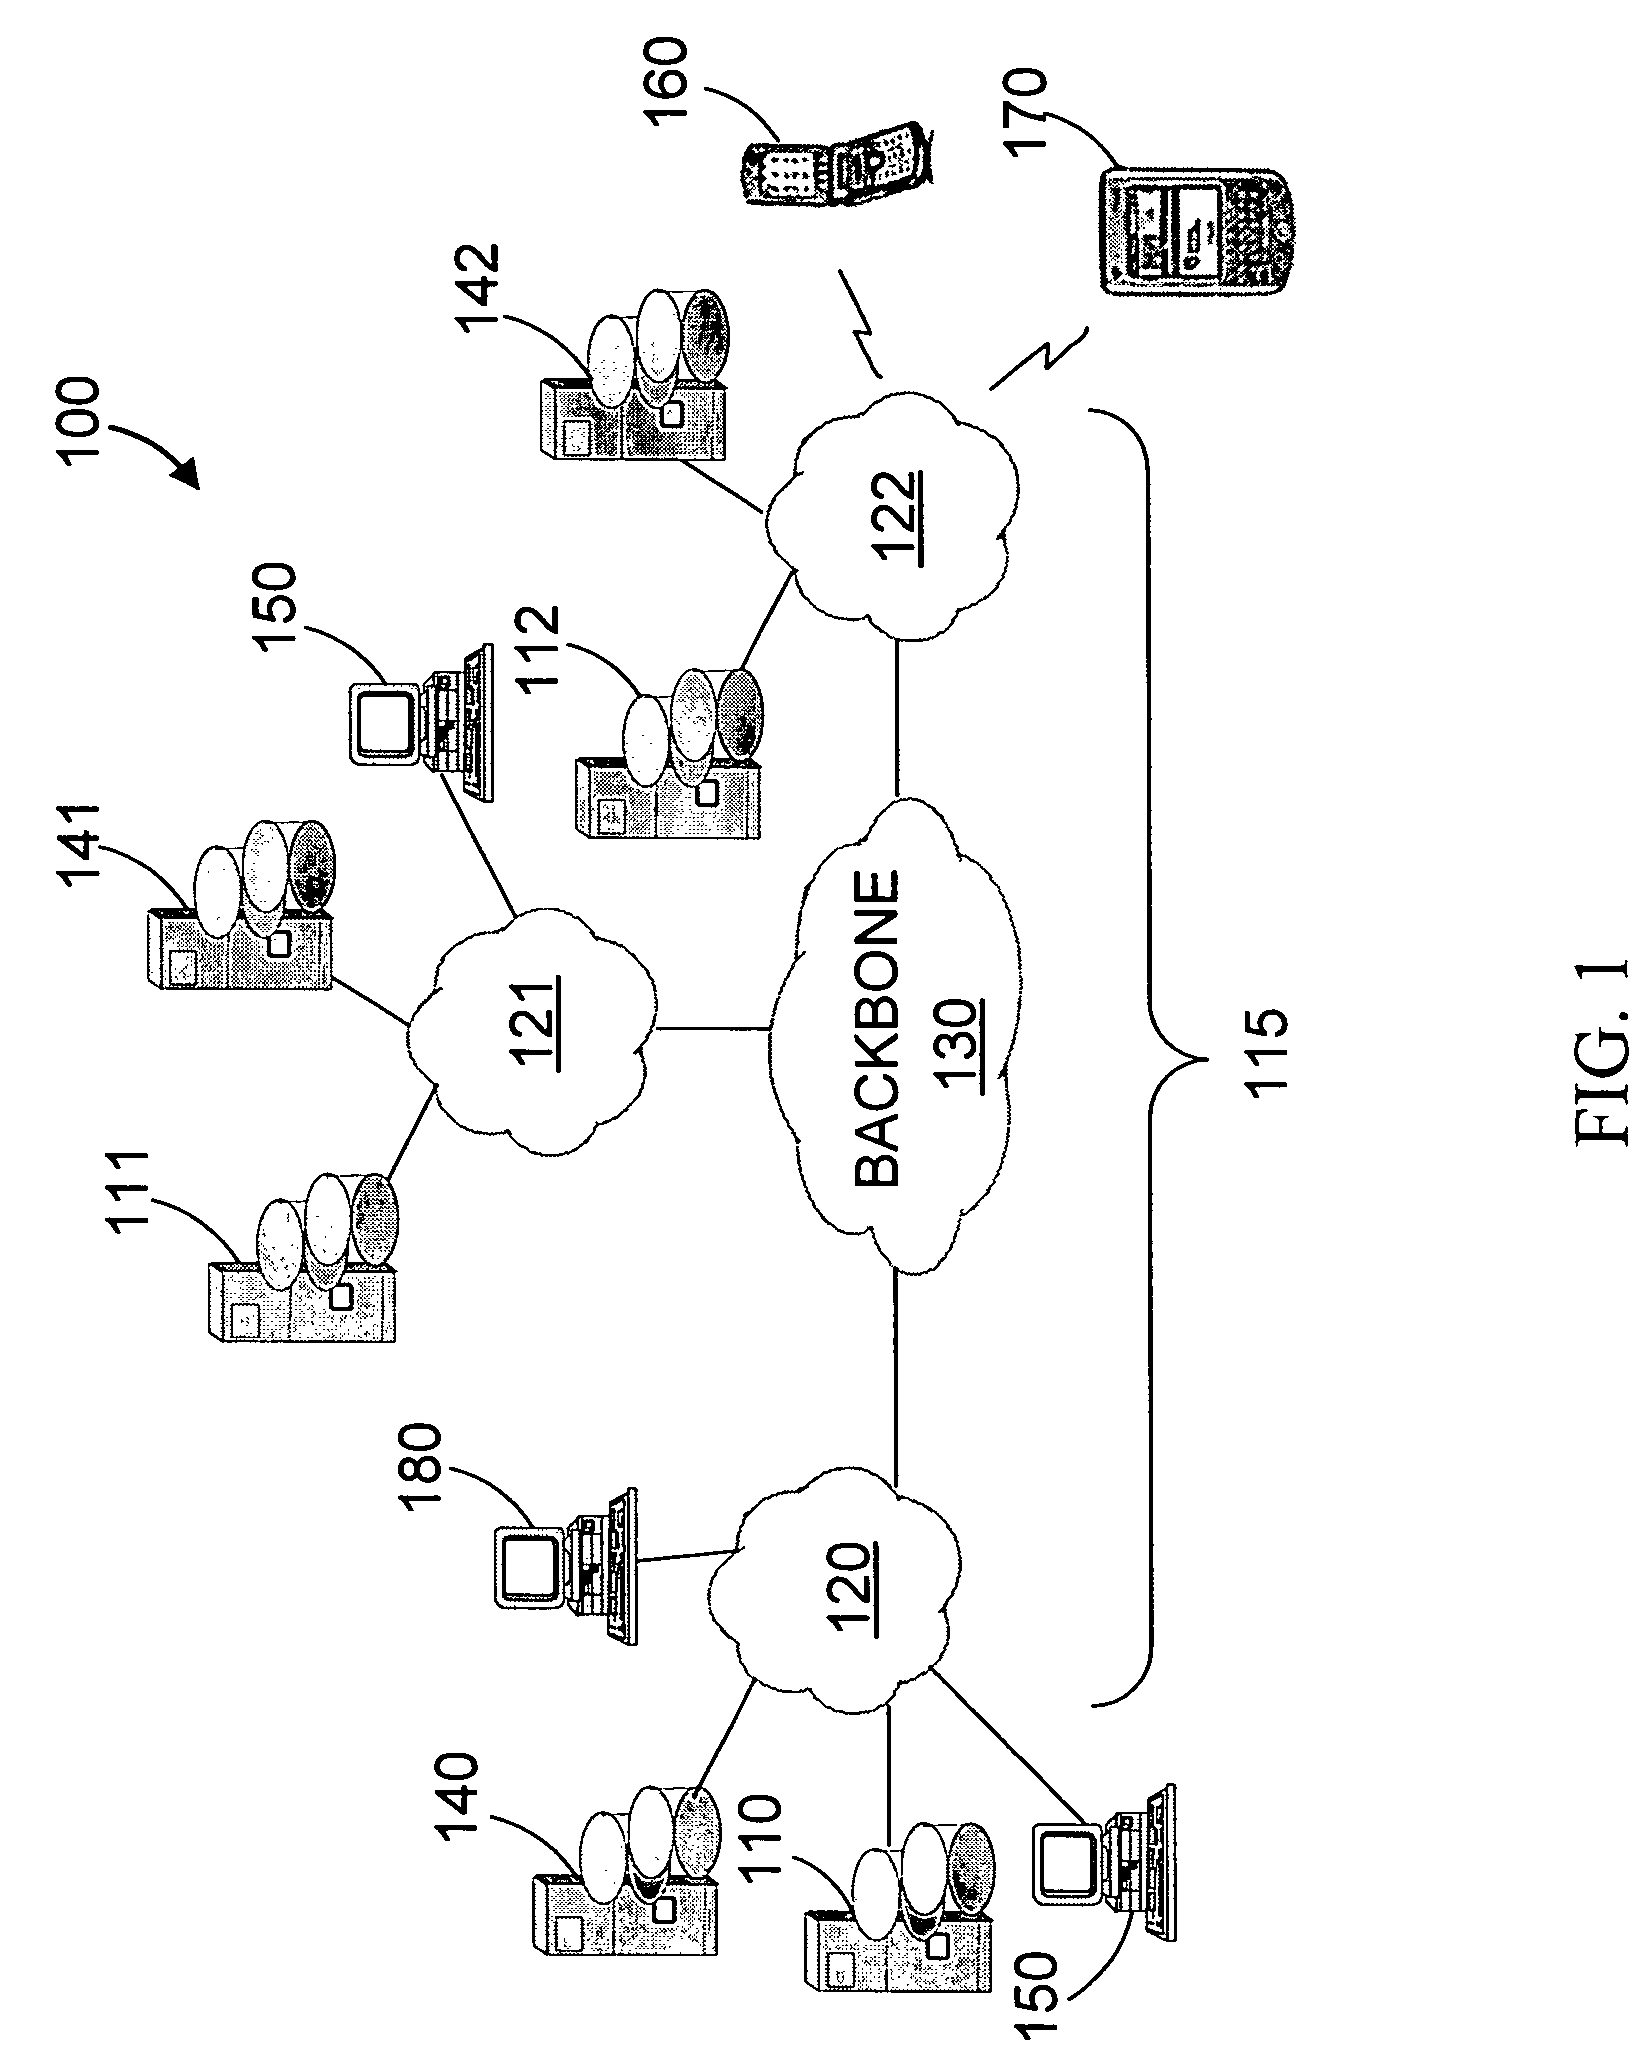 Alerting method, apparatus, server, and system